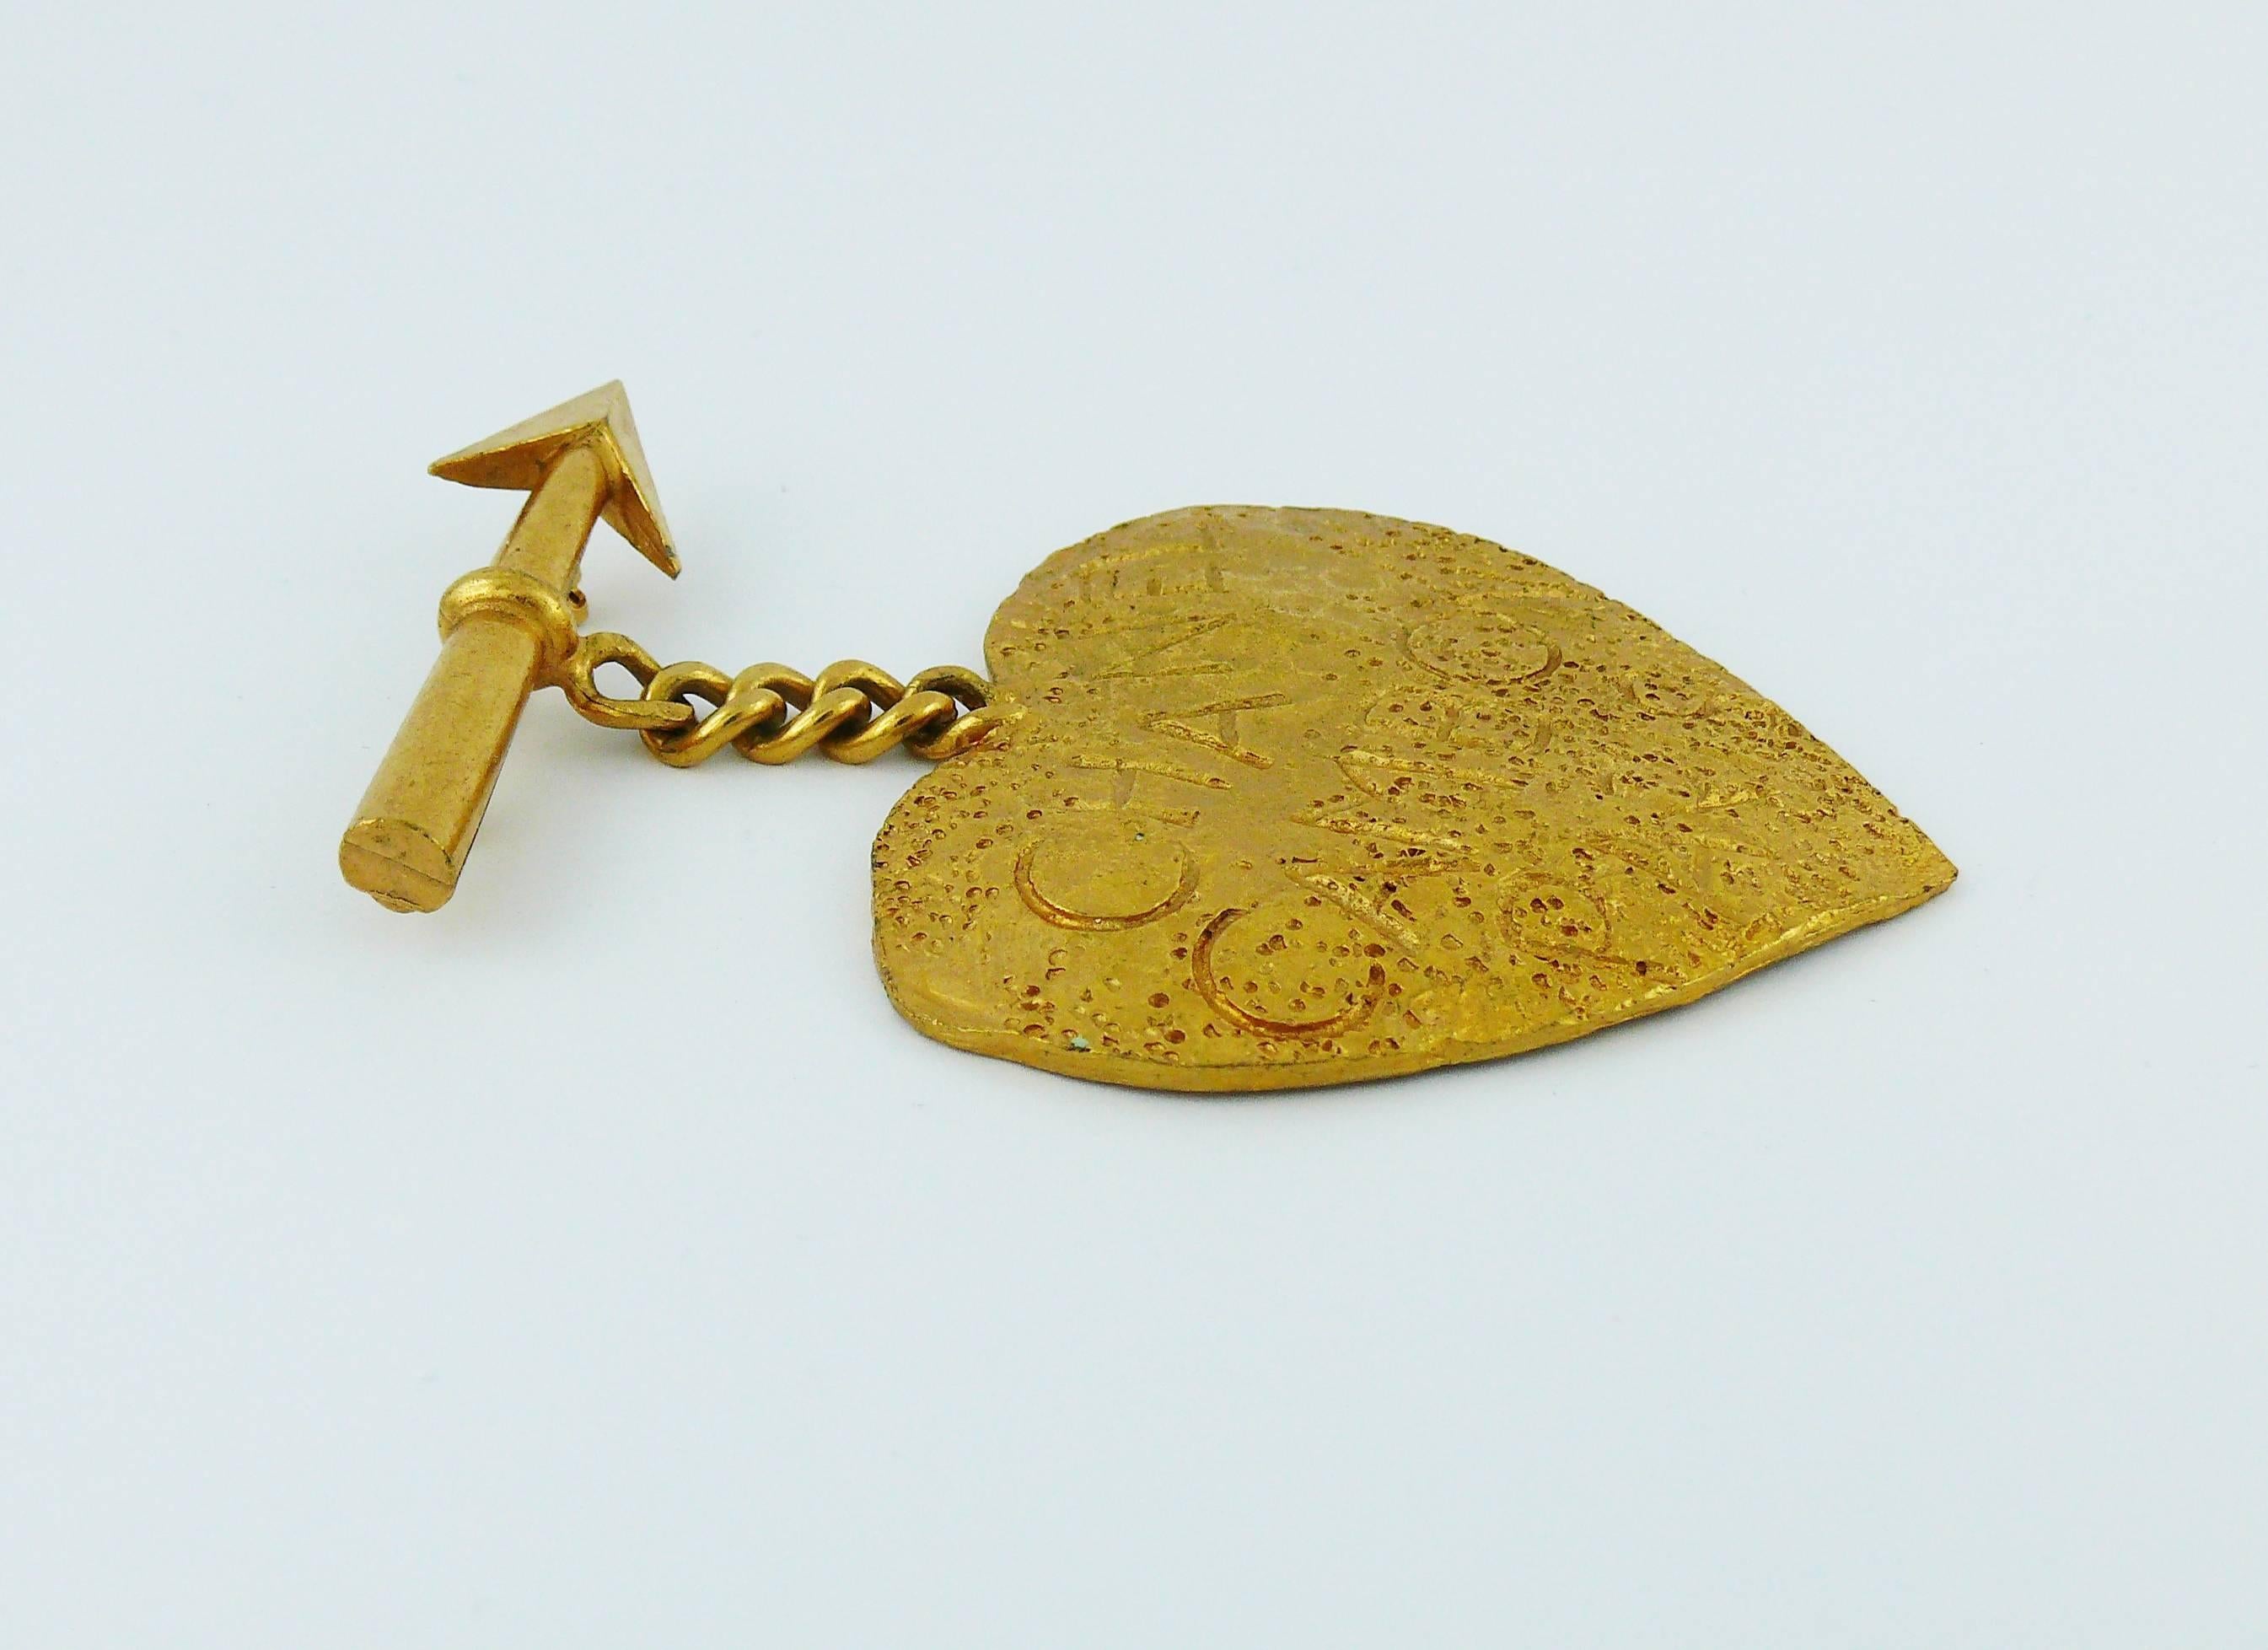 CHANEL vintage rare gold toned heart brooch featuring arrow and curb chain.

Embossed "CHANEL CAMBON PARIS" on the textured heart.

Spring 1993 Collection.

Marked CHANEL 93 P Made in France.

Indicative measurements : height approx. 7.8